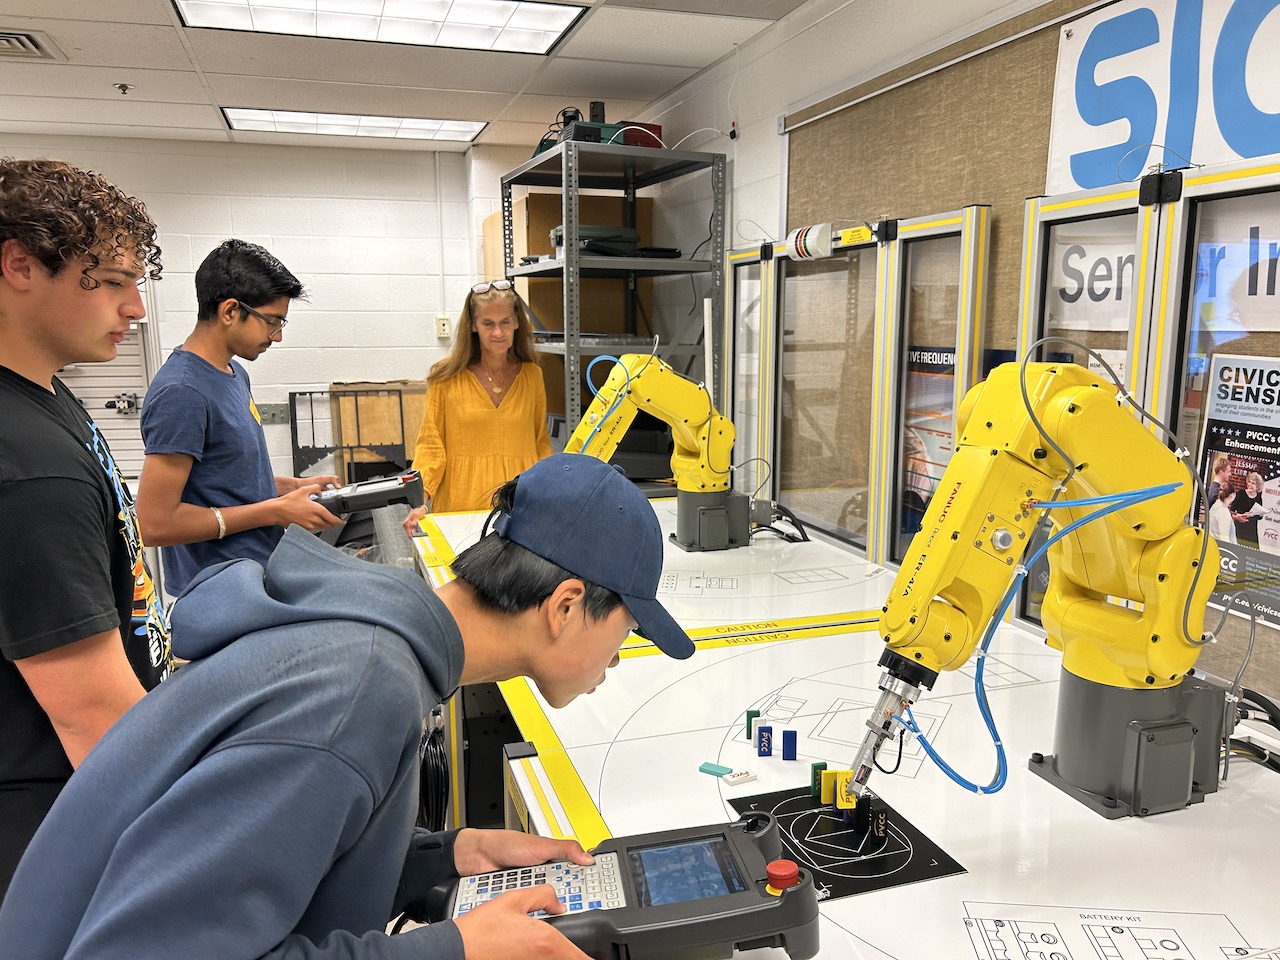 A Scholar operates a robotic arm during a visit to PVCC with the Engineering Tech. pathway during a spring programming day.